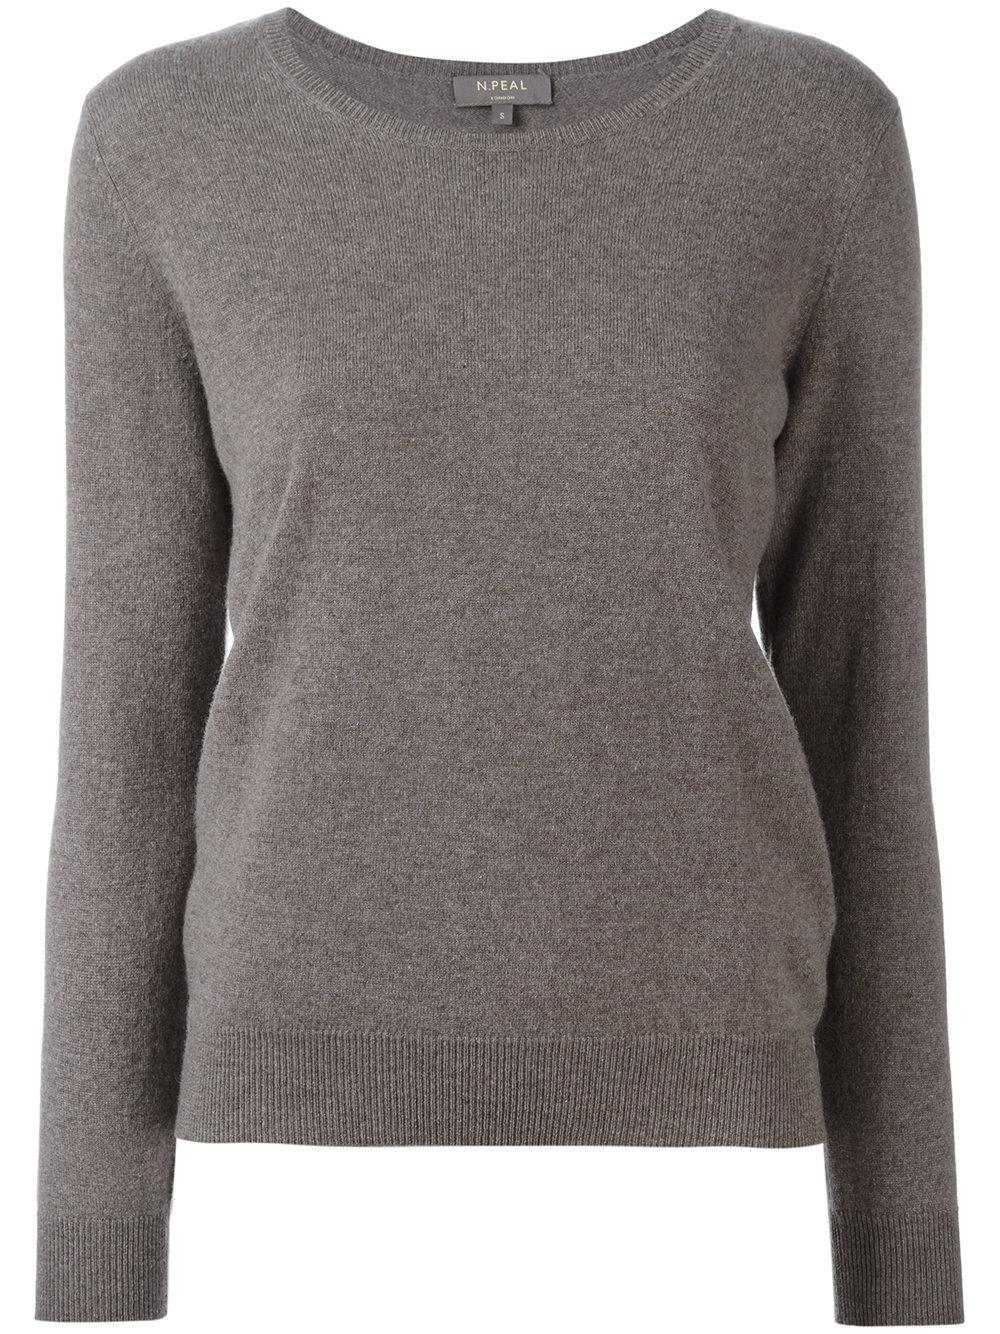 Lyst - N.Peal Cashmere Plain Jumper in Brown